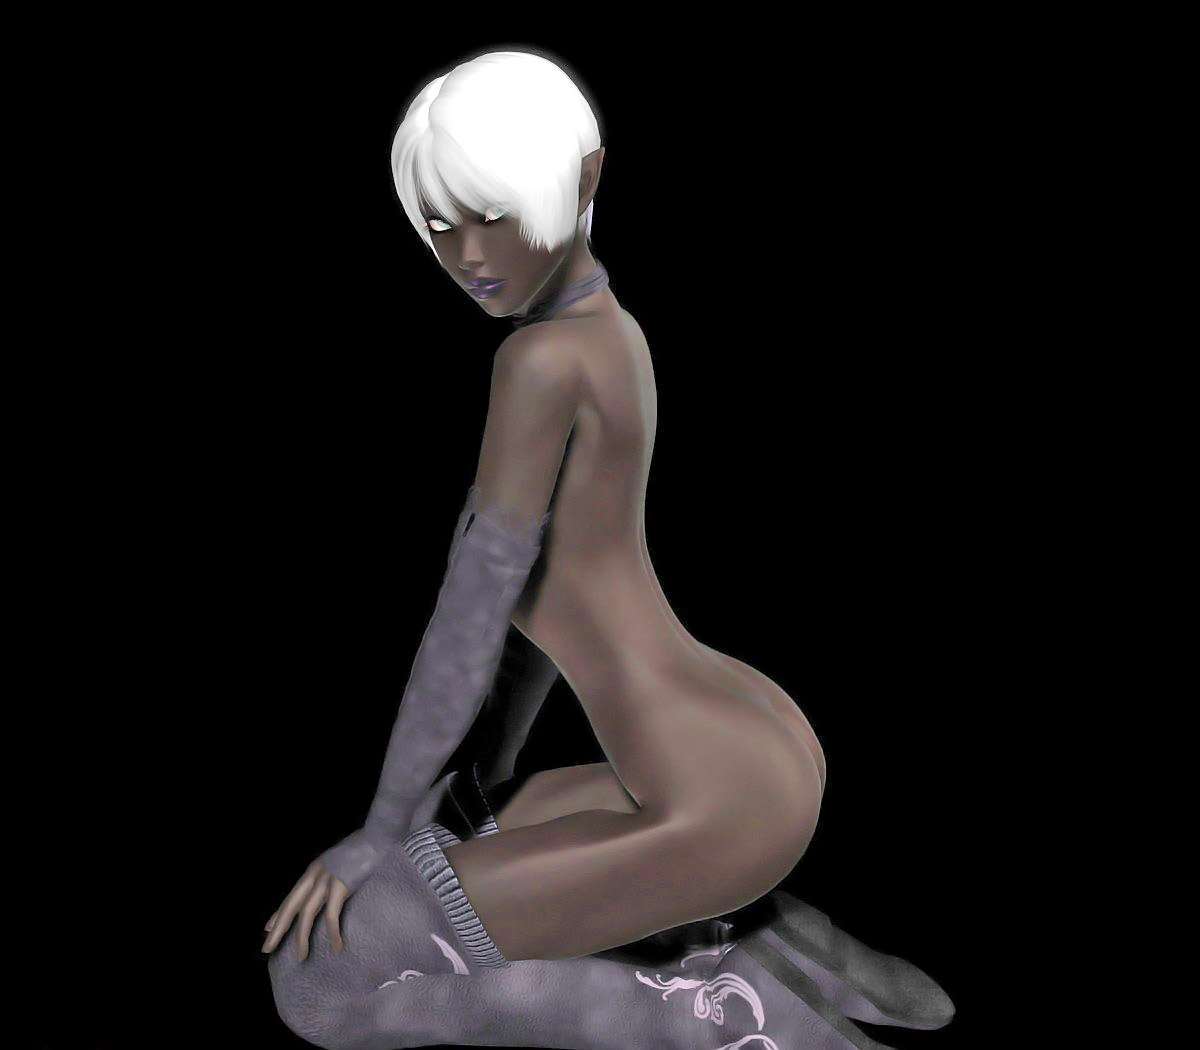 1200px x 1050px - Sexy 3D girls with perfect bodies posing naked - nude fantasy gallery at  Hd3dMonsterSex.com